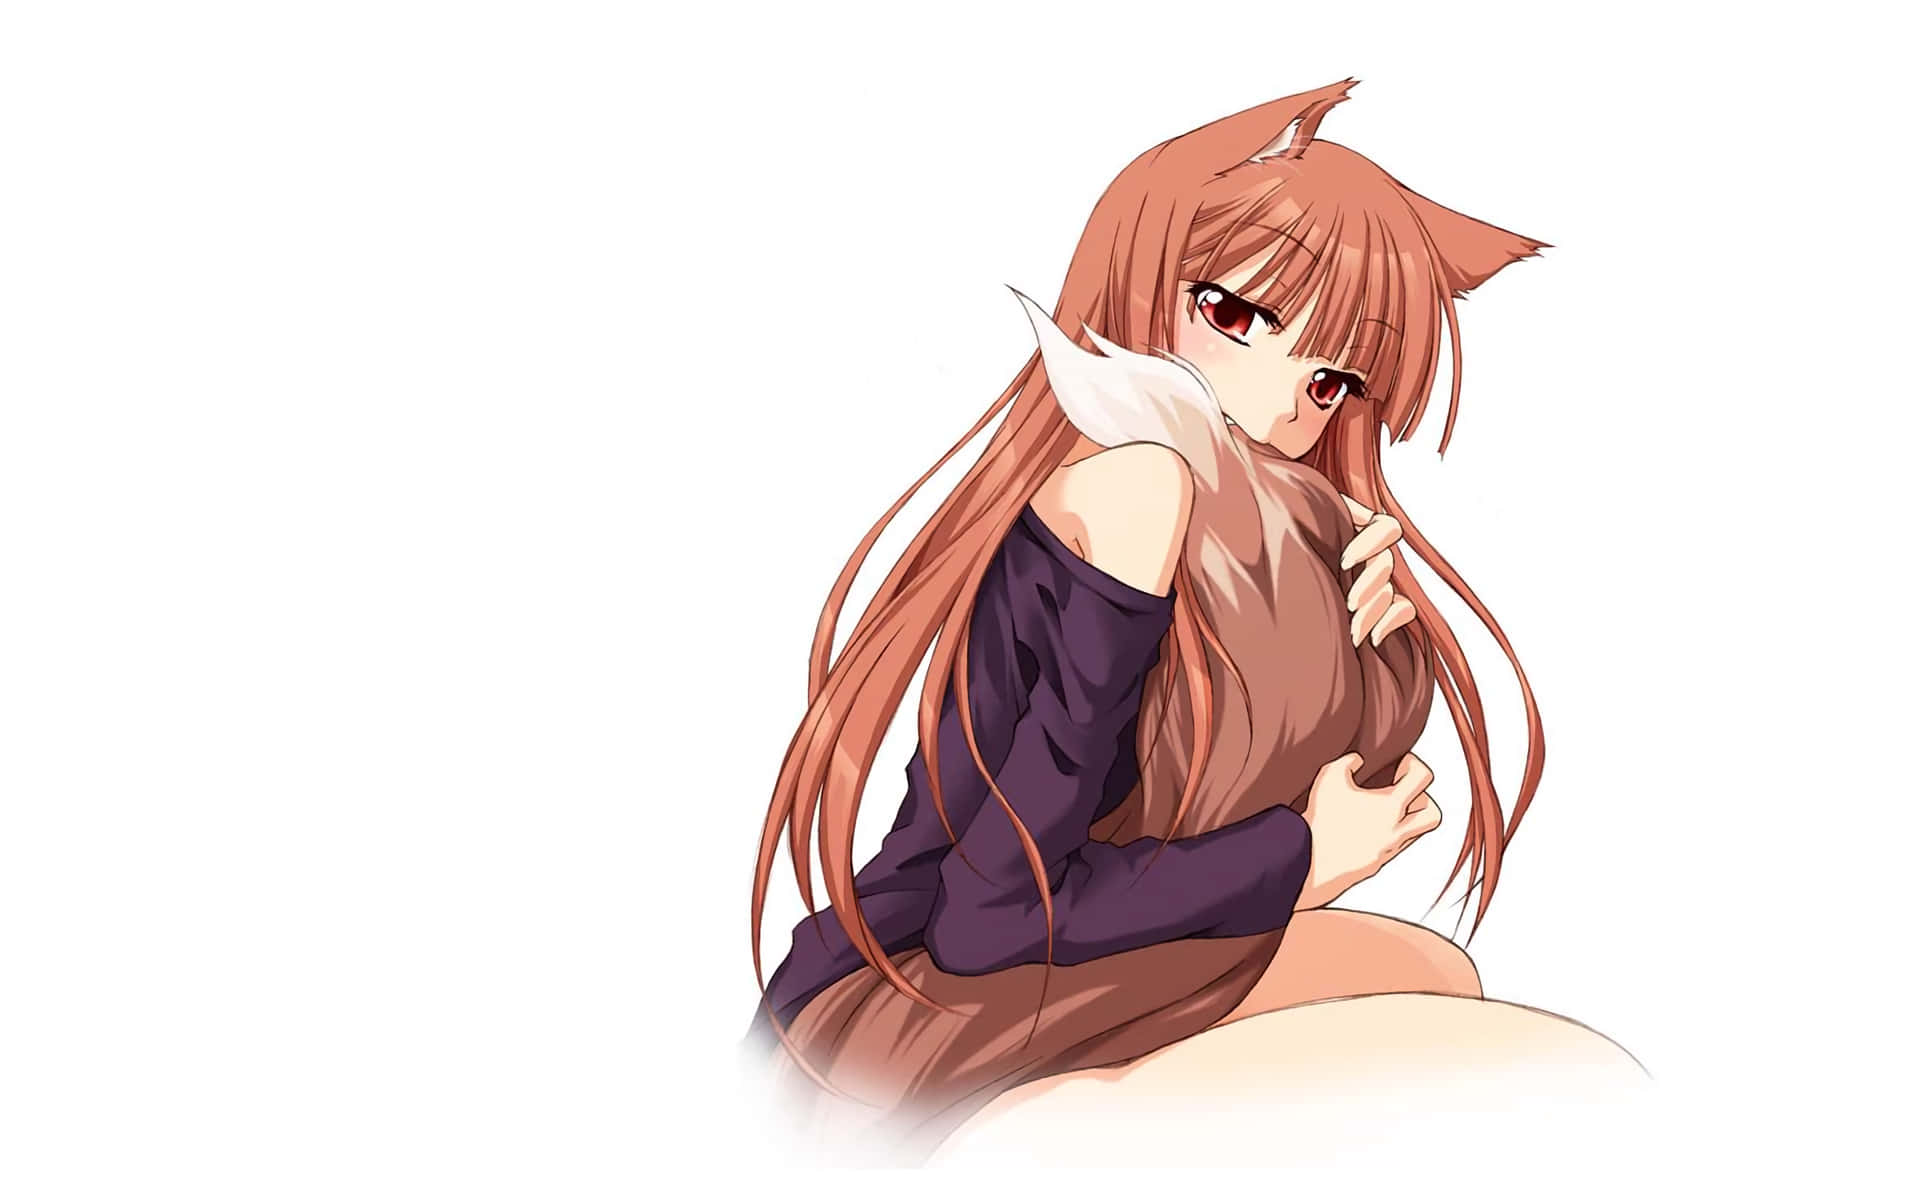 Lawrence amd Holo - Spice and Wolf Wallpaper